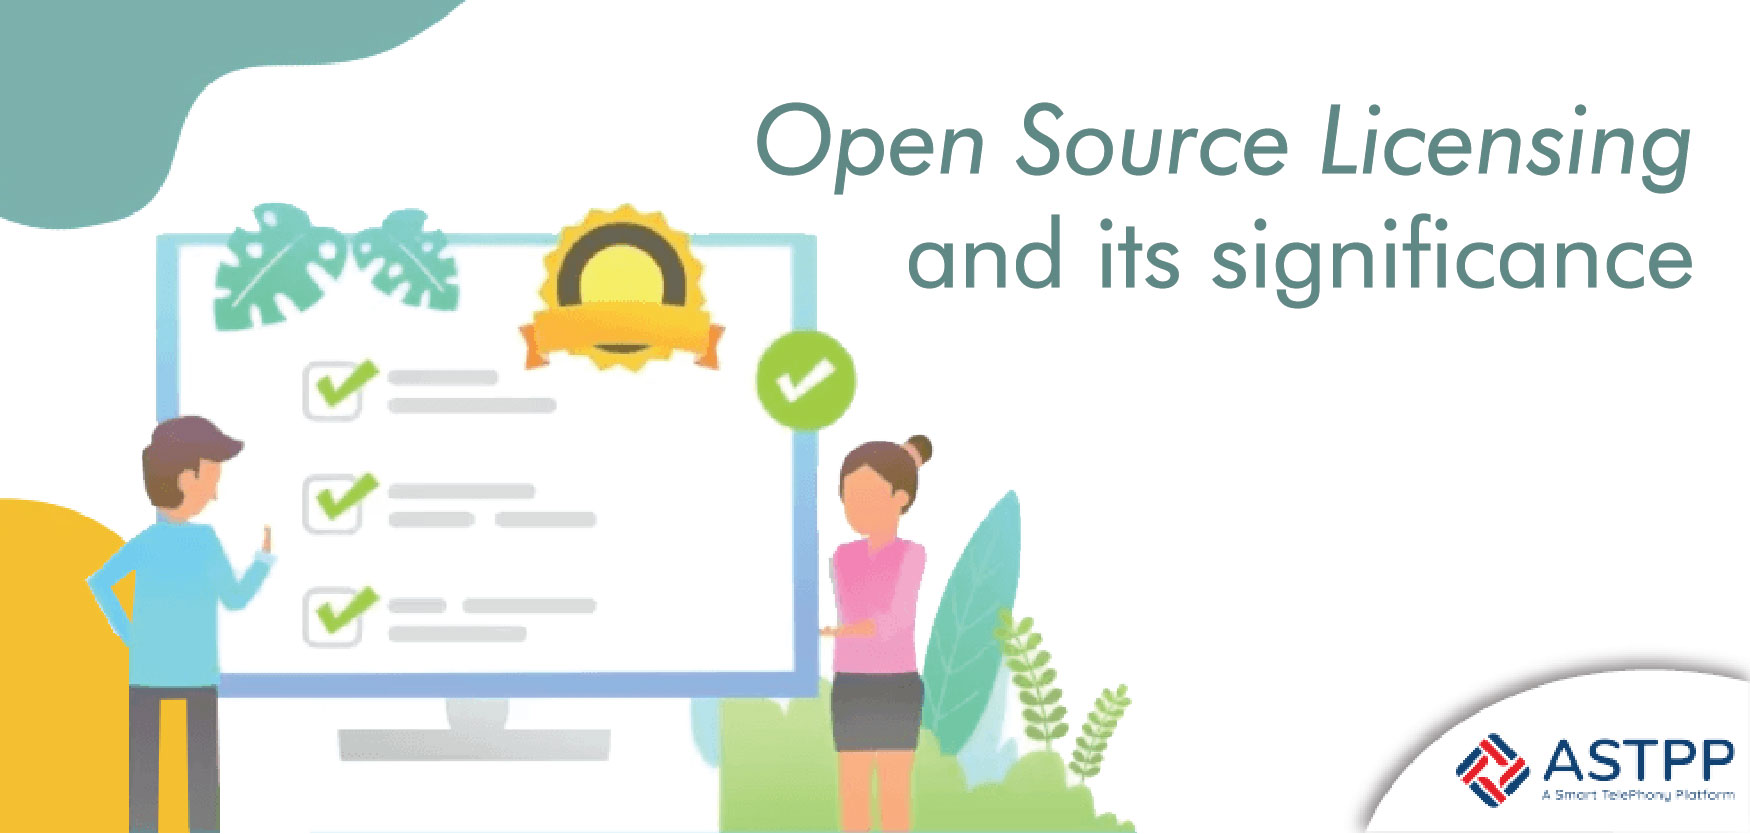 Open Source Licensing related to the VoIP industry and Its Significance